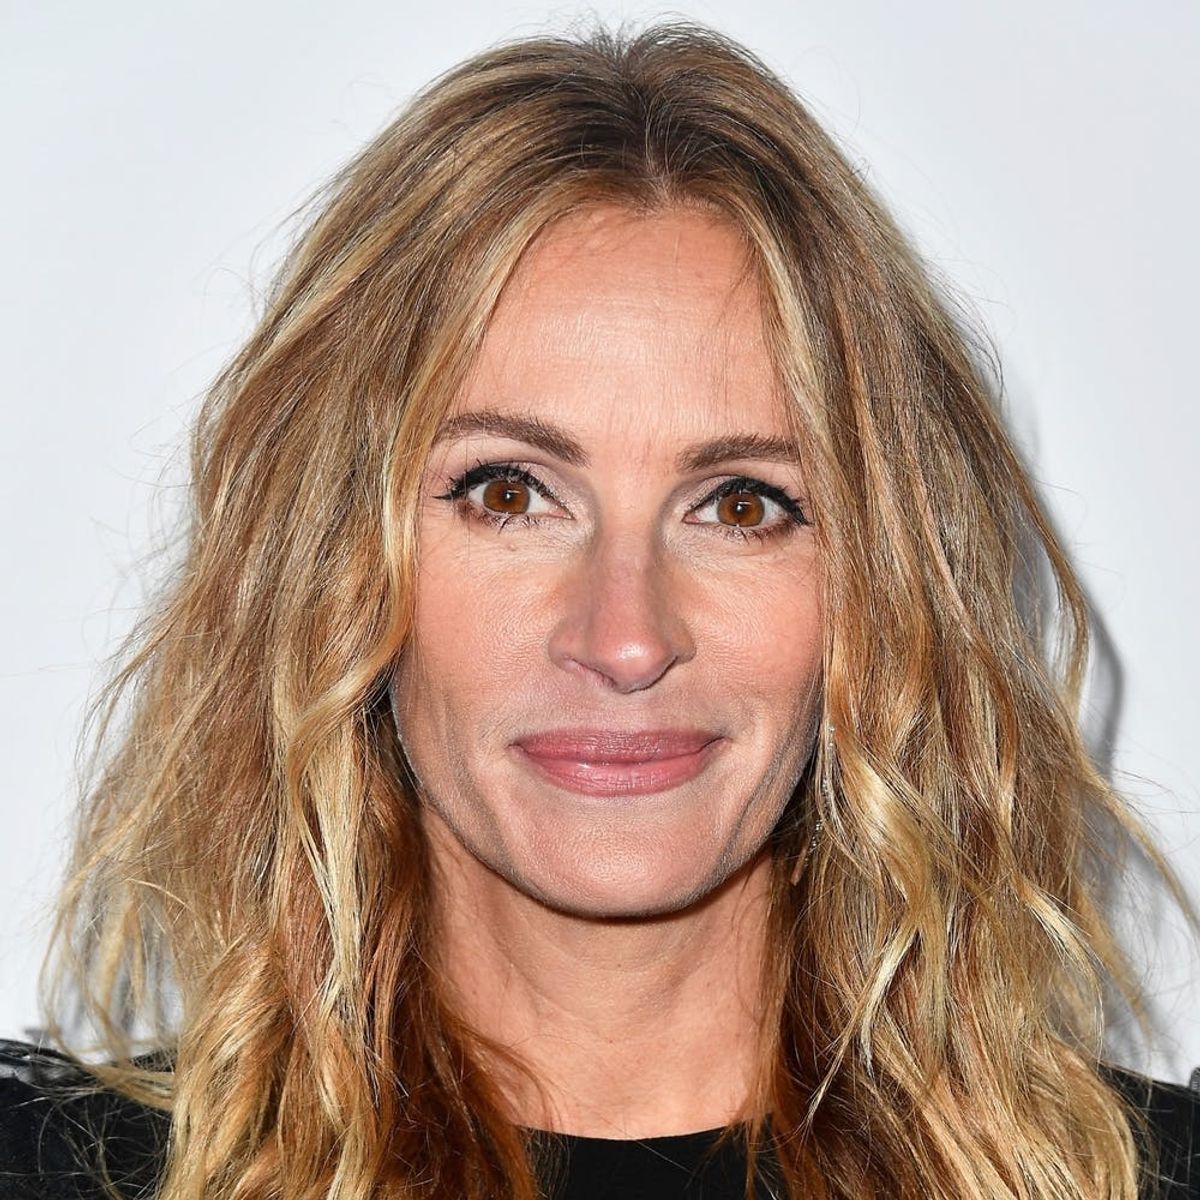 Julia Roberts Is Giving Us Major ‘Pretty Woman’ Vibes With Her Latest Hair Color